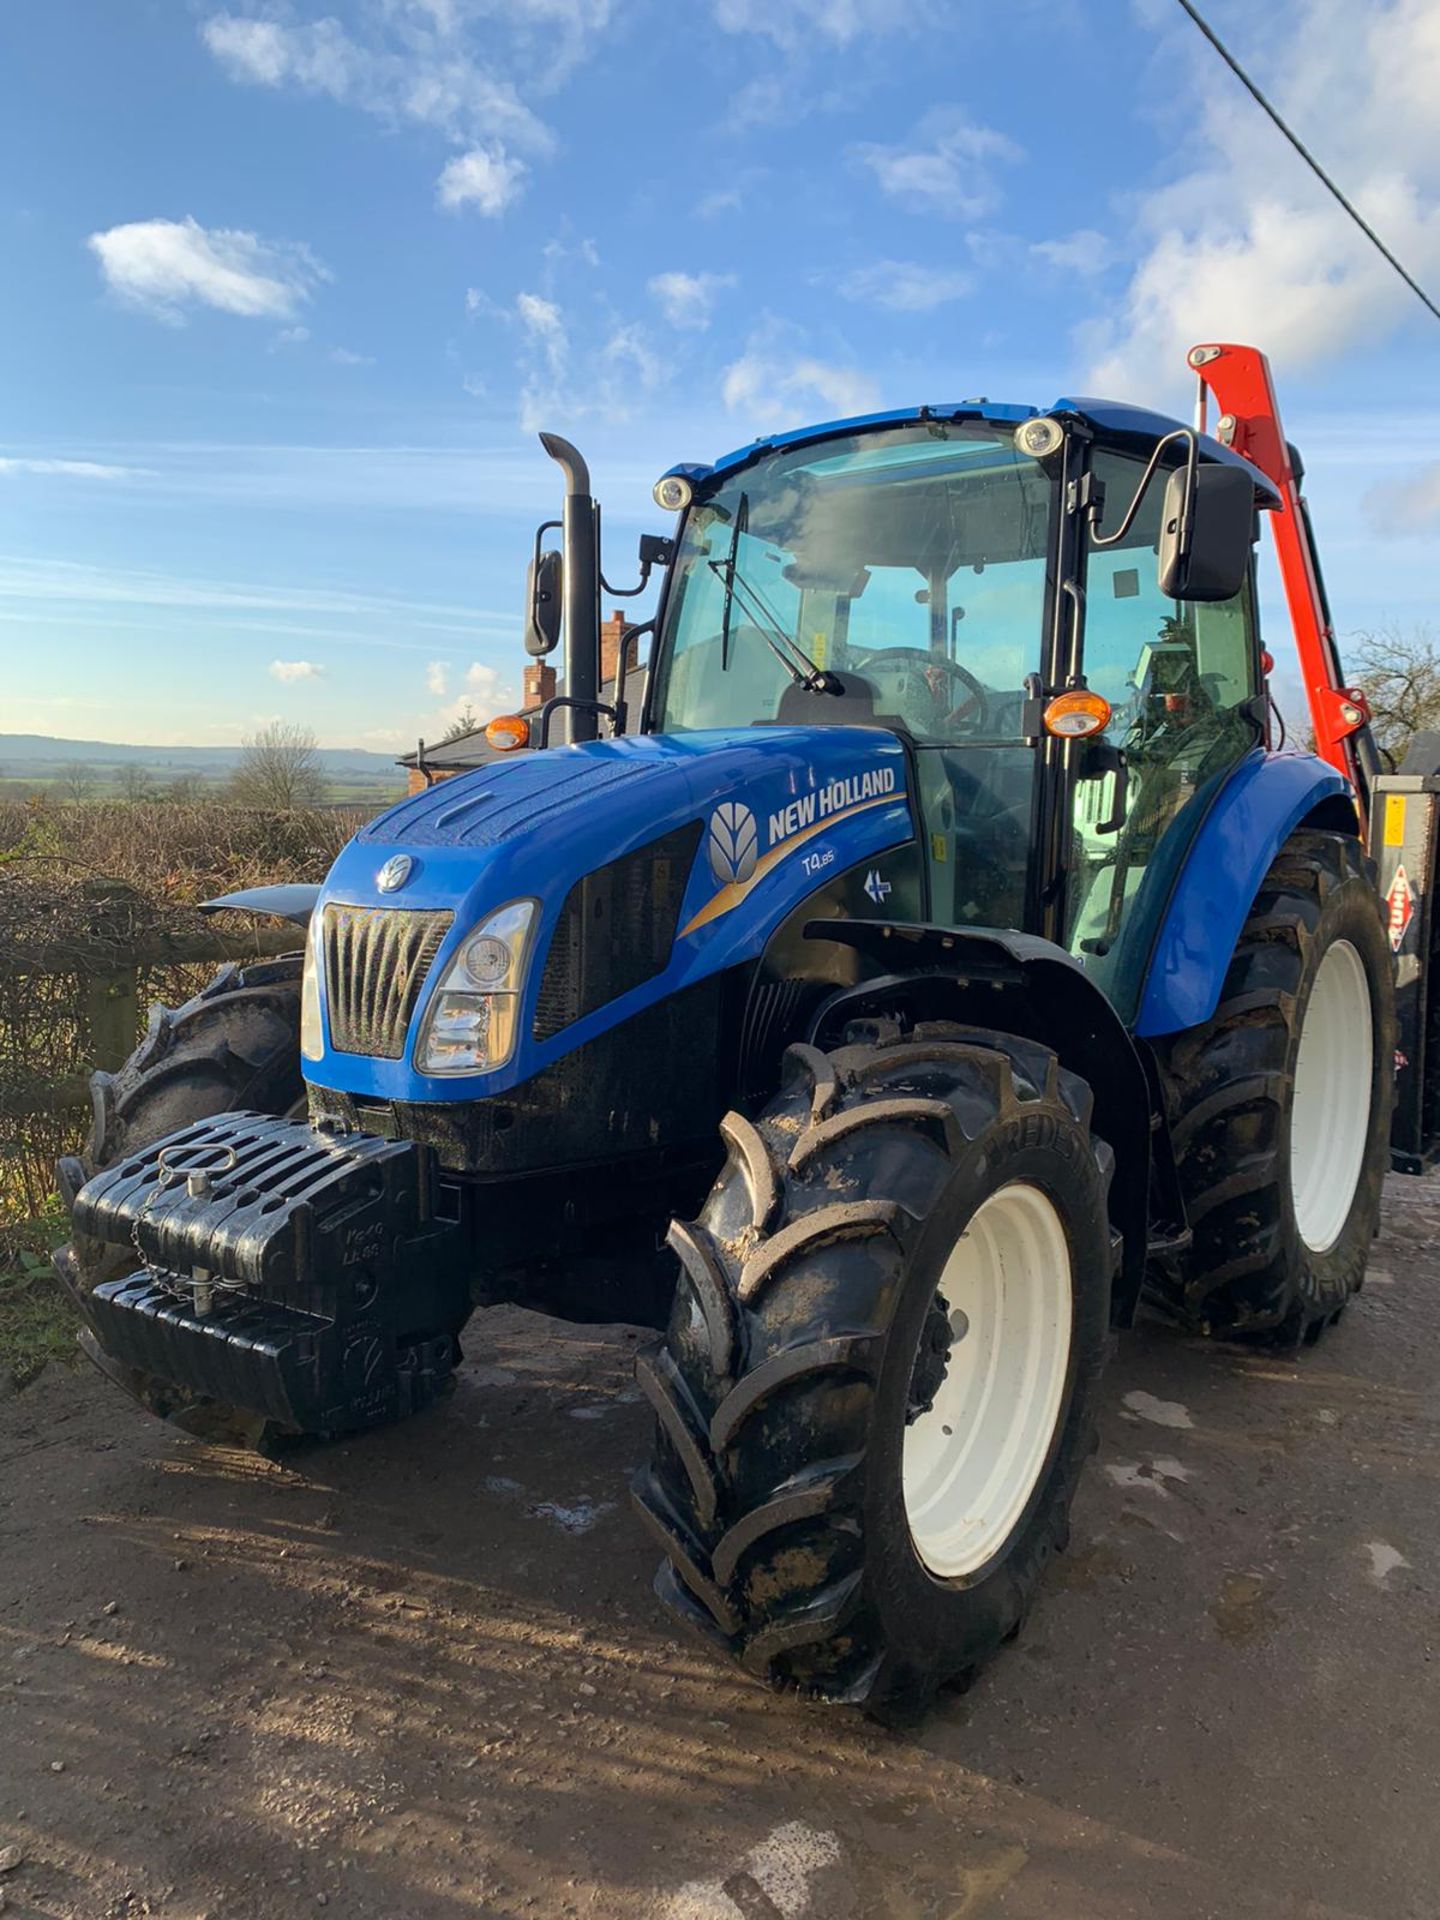 2017/67 REG NEW HOLLAND T4.85 4WD DIESEL TRACTOR, FULL GLASS CAB, HEDGECUTTER SOLD SEPERATELY - Image 3 of 20